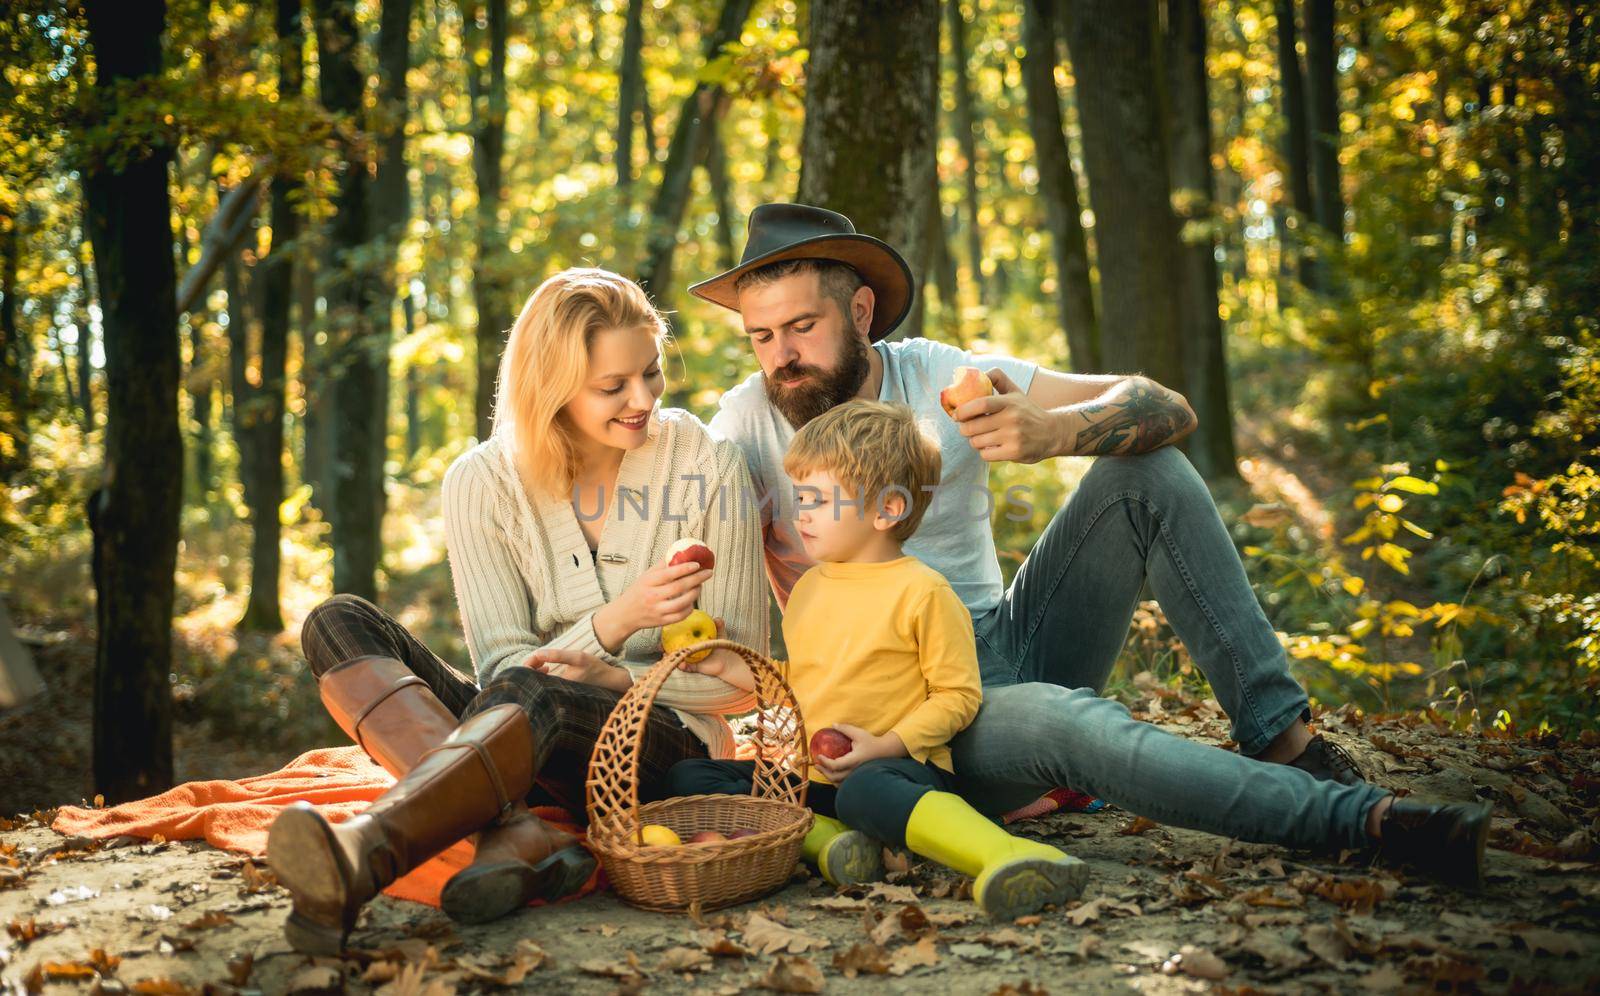 A young family with small child having picnic in autumn nature at sunset. There is a basket with meal and toys for the kid. Young smiling family doing a picnic on an autumns day